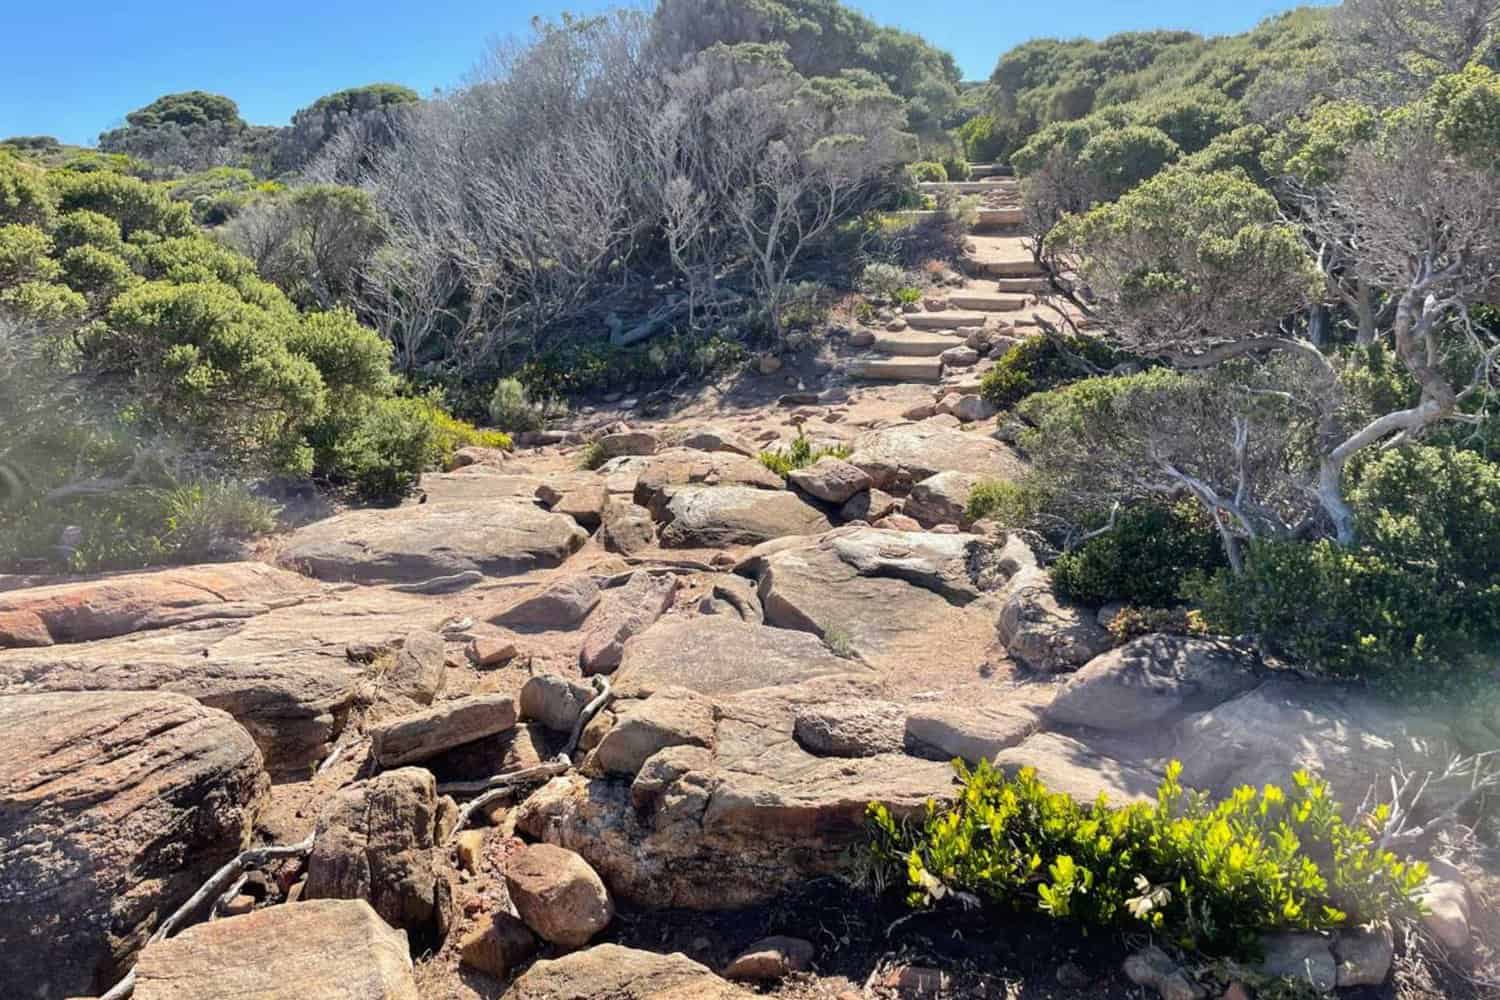 A natural stone pathway meandering through shrubby vegetation, leading towards the Wilyabrup sea cliffs, highlighted by the bright Australian sun.